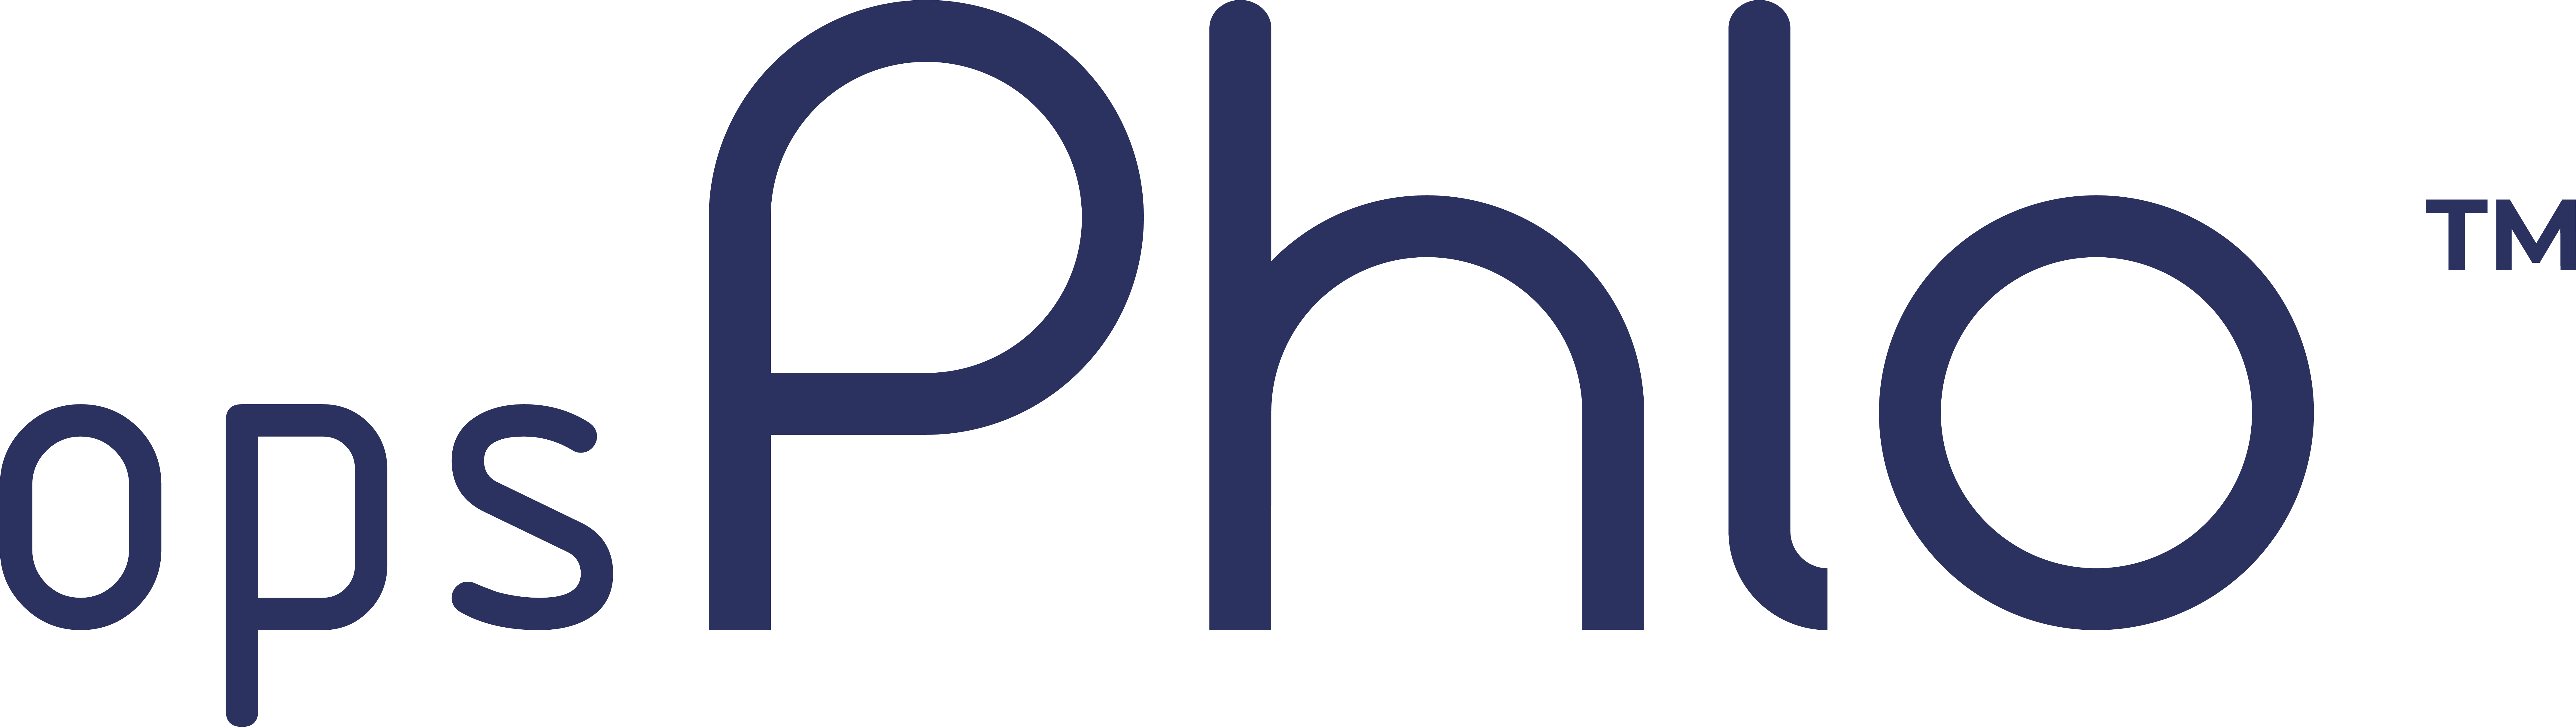 Phlo Systems Limited - opsPhlo - Commodity Trade and Risk Management Software avec ERP